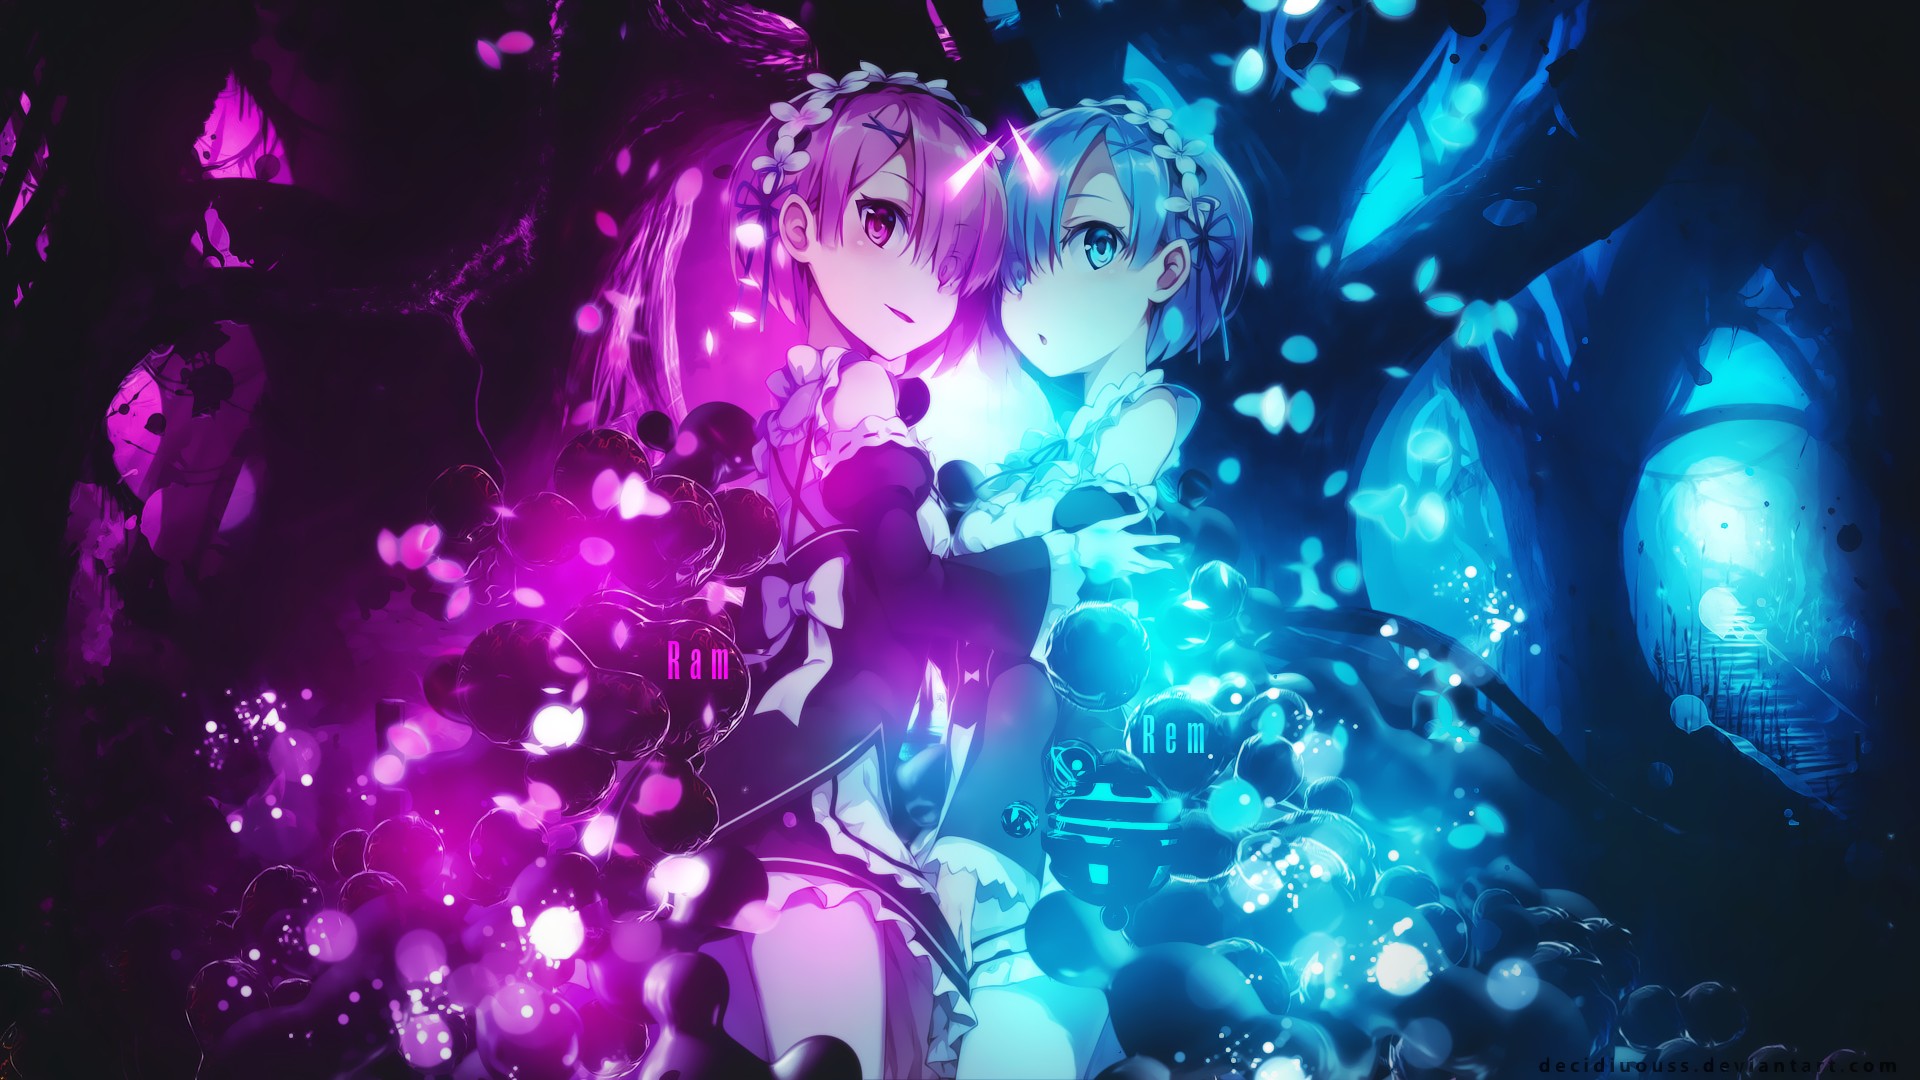 Re:Zero wallpaper ·① Download free cool HD wallpapers for ...